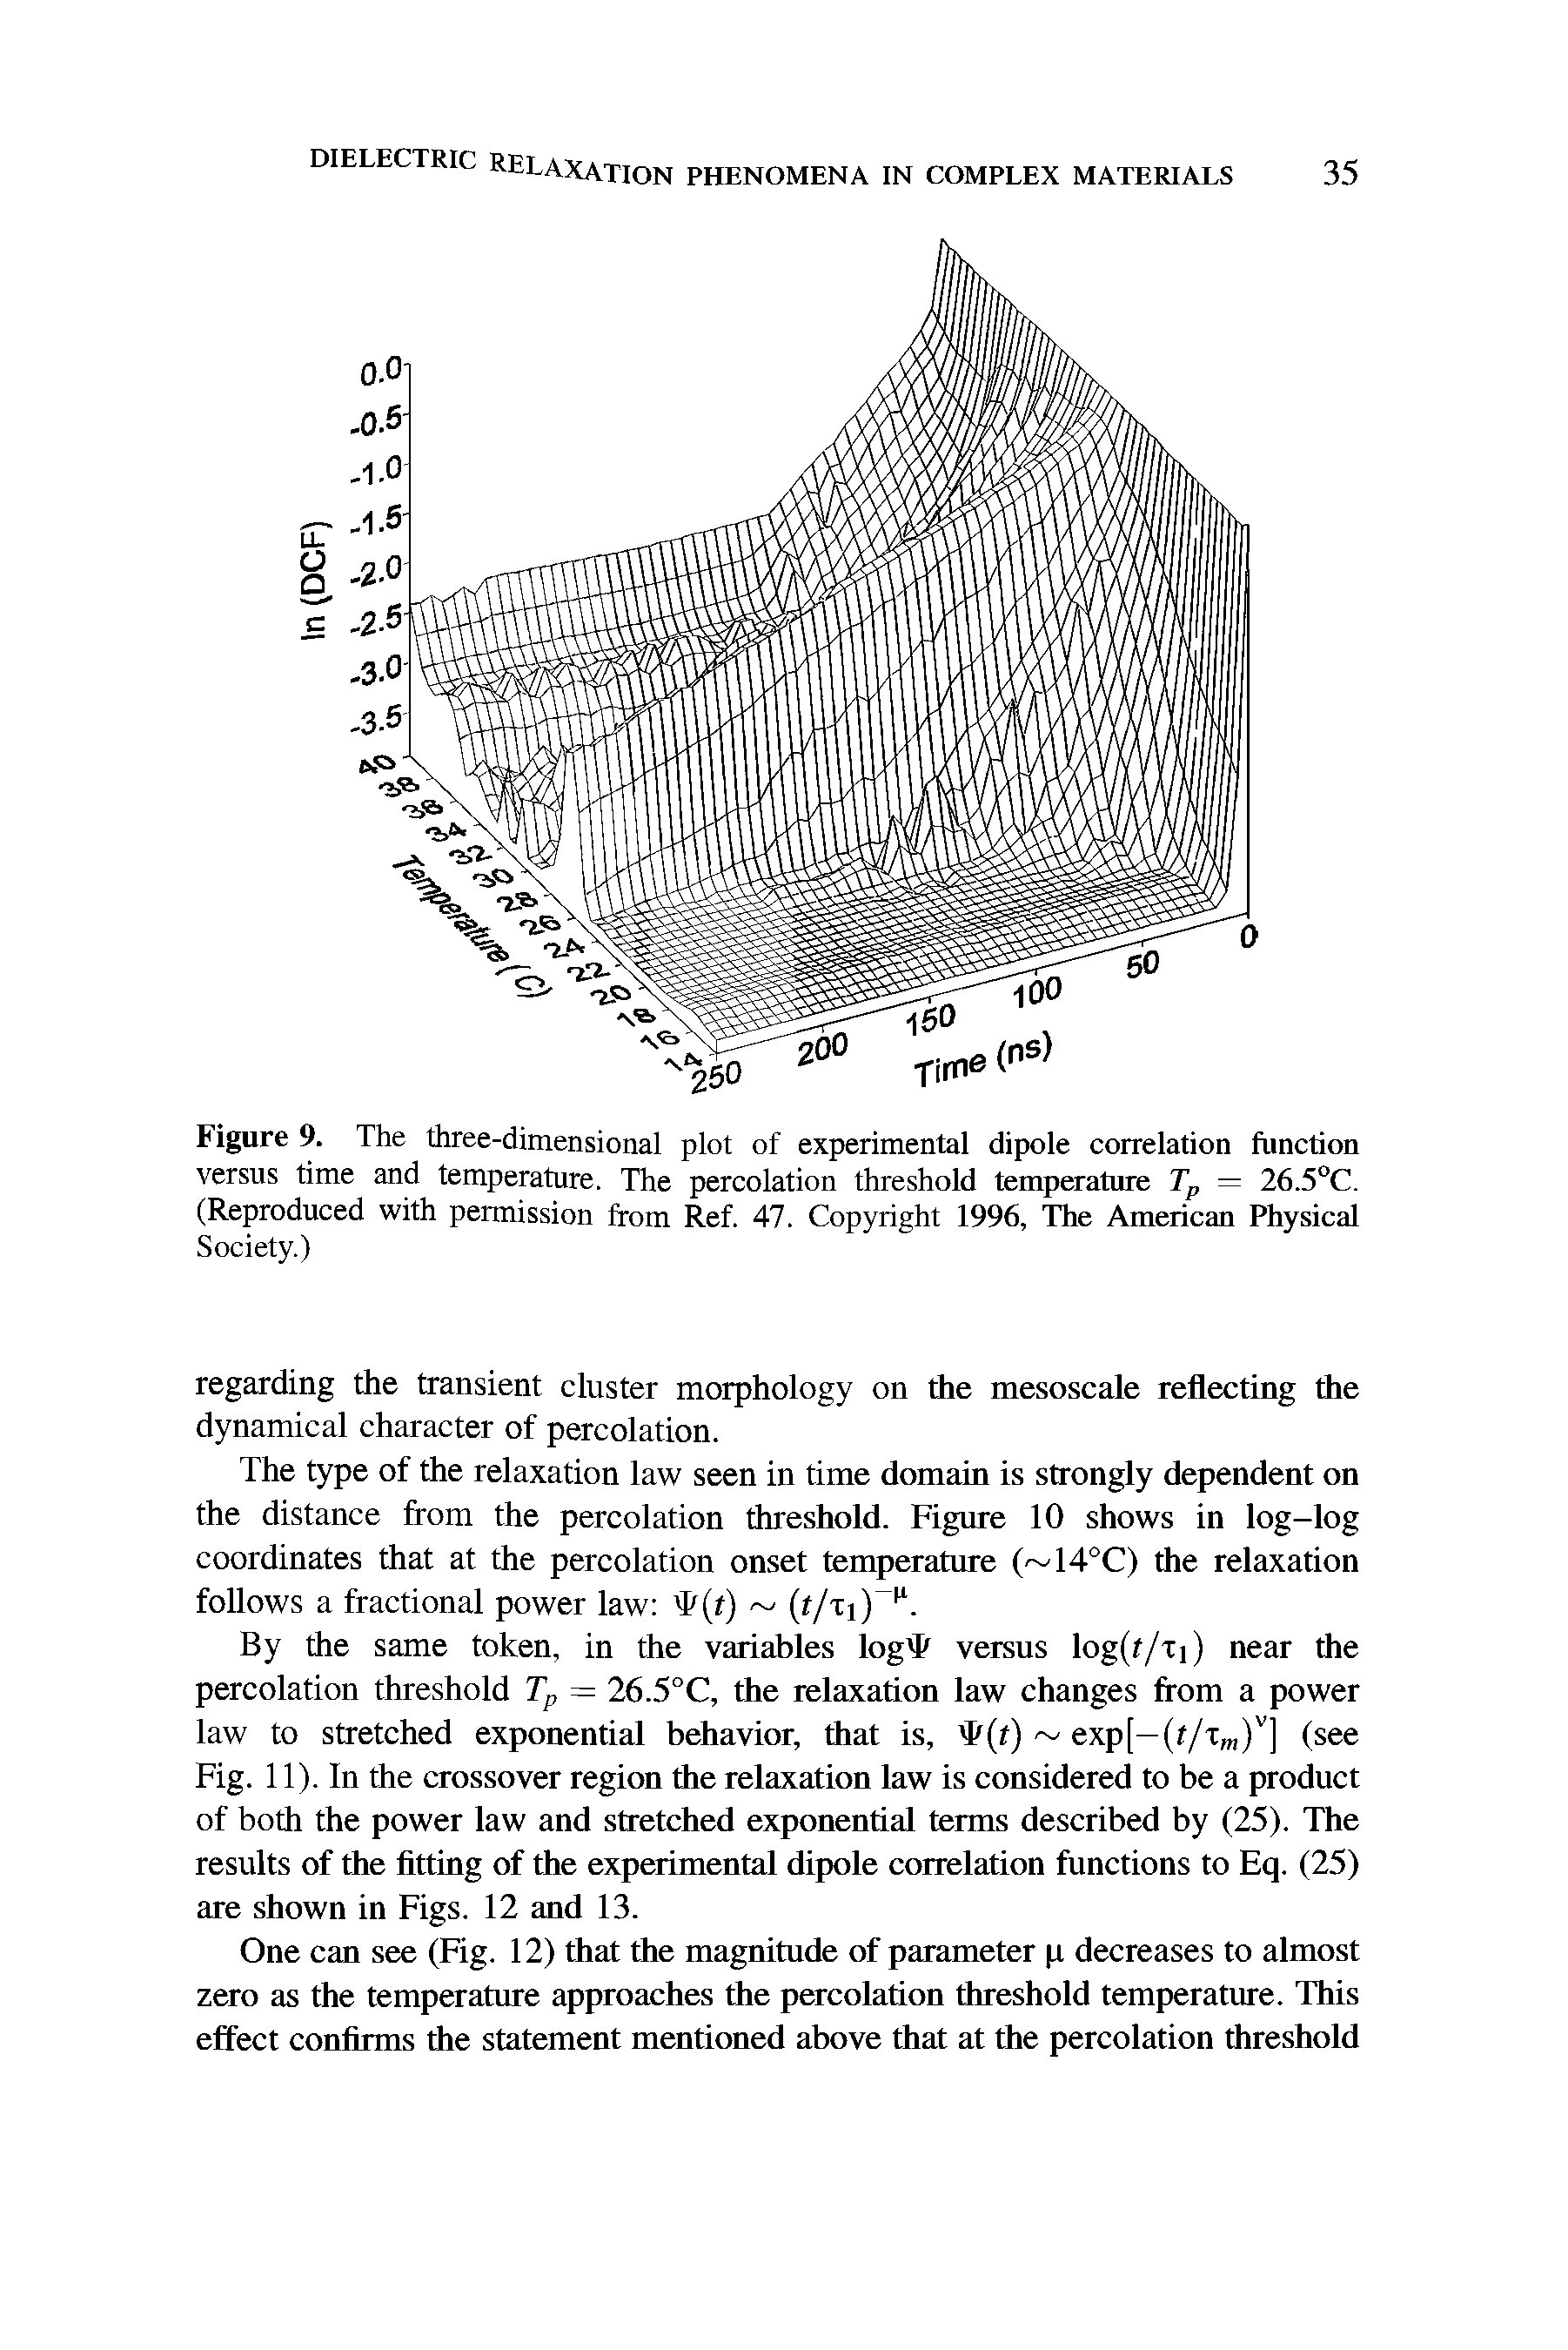 Figure 9. The three-dimensional plot of experimental dipole correlation function versus time and temperature. The percolation threshold temperature Tp = 26.5°C. (Reproduced with permission from Ref. 47. Copyright 1996, The American Physical...